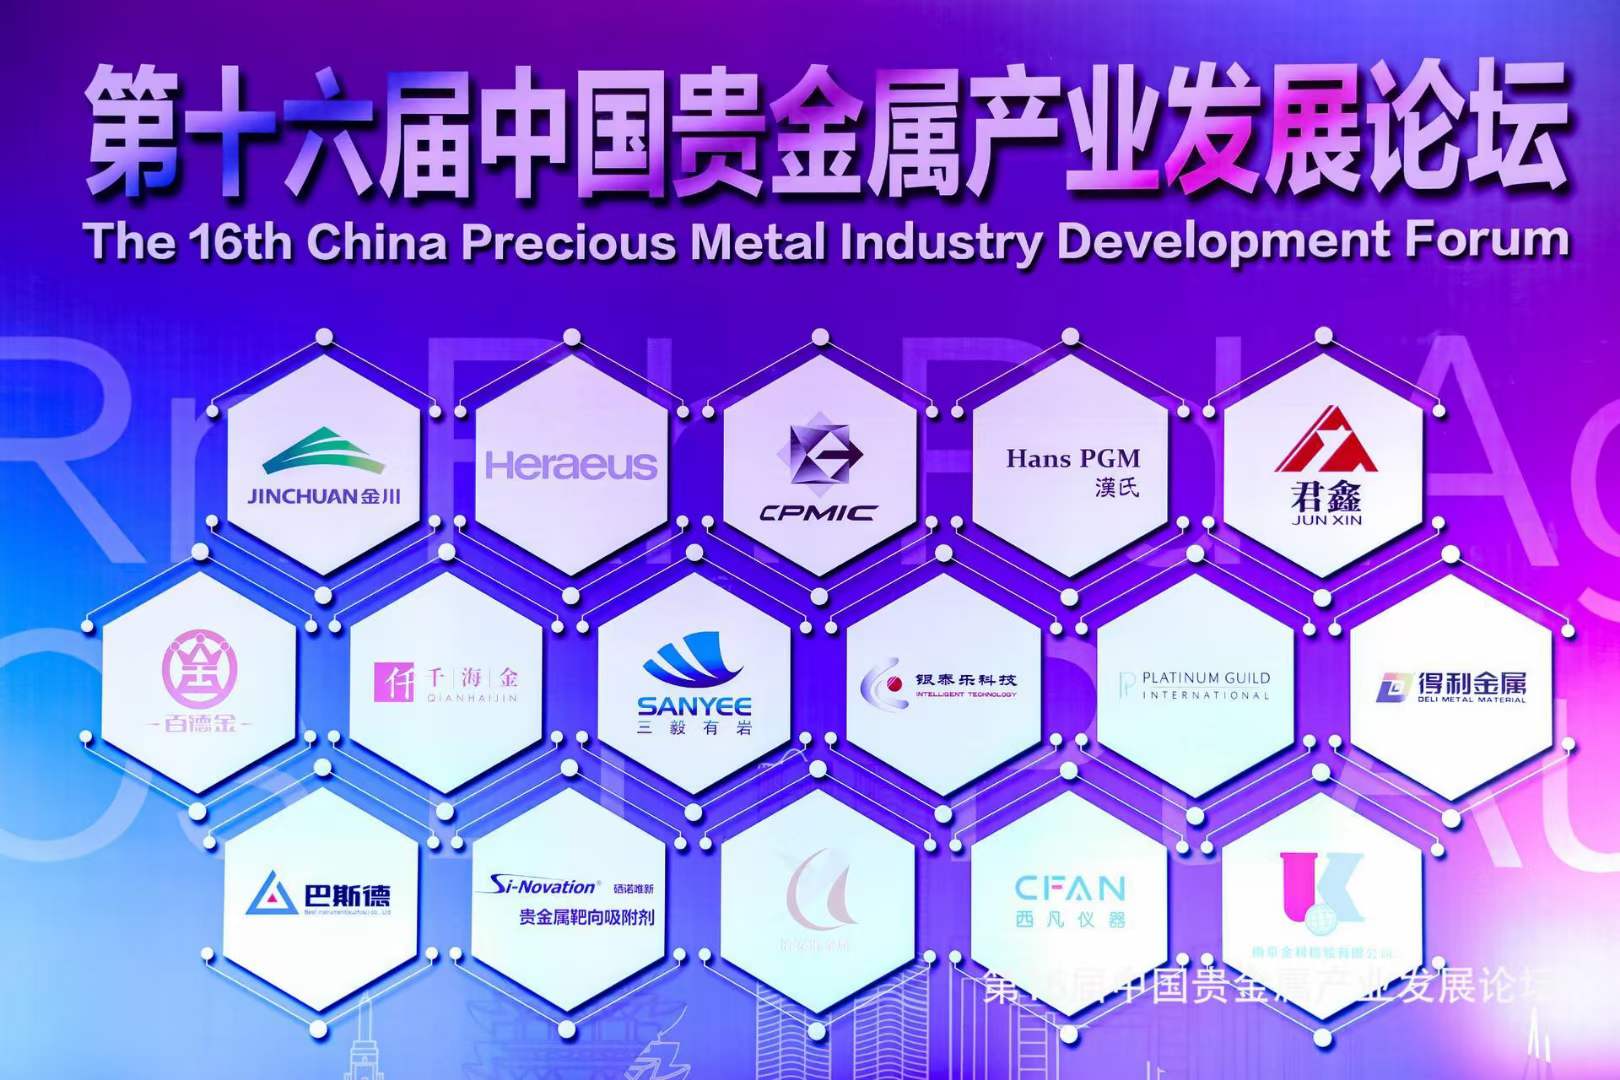 CFAN Participated In The 16th China Precious Metal Industry Development Forum